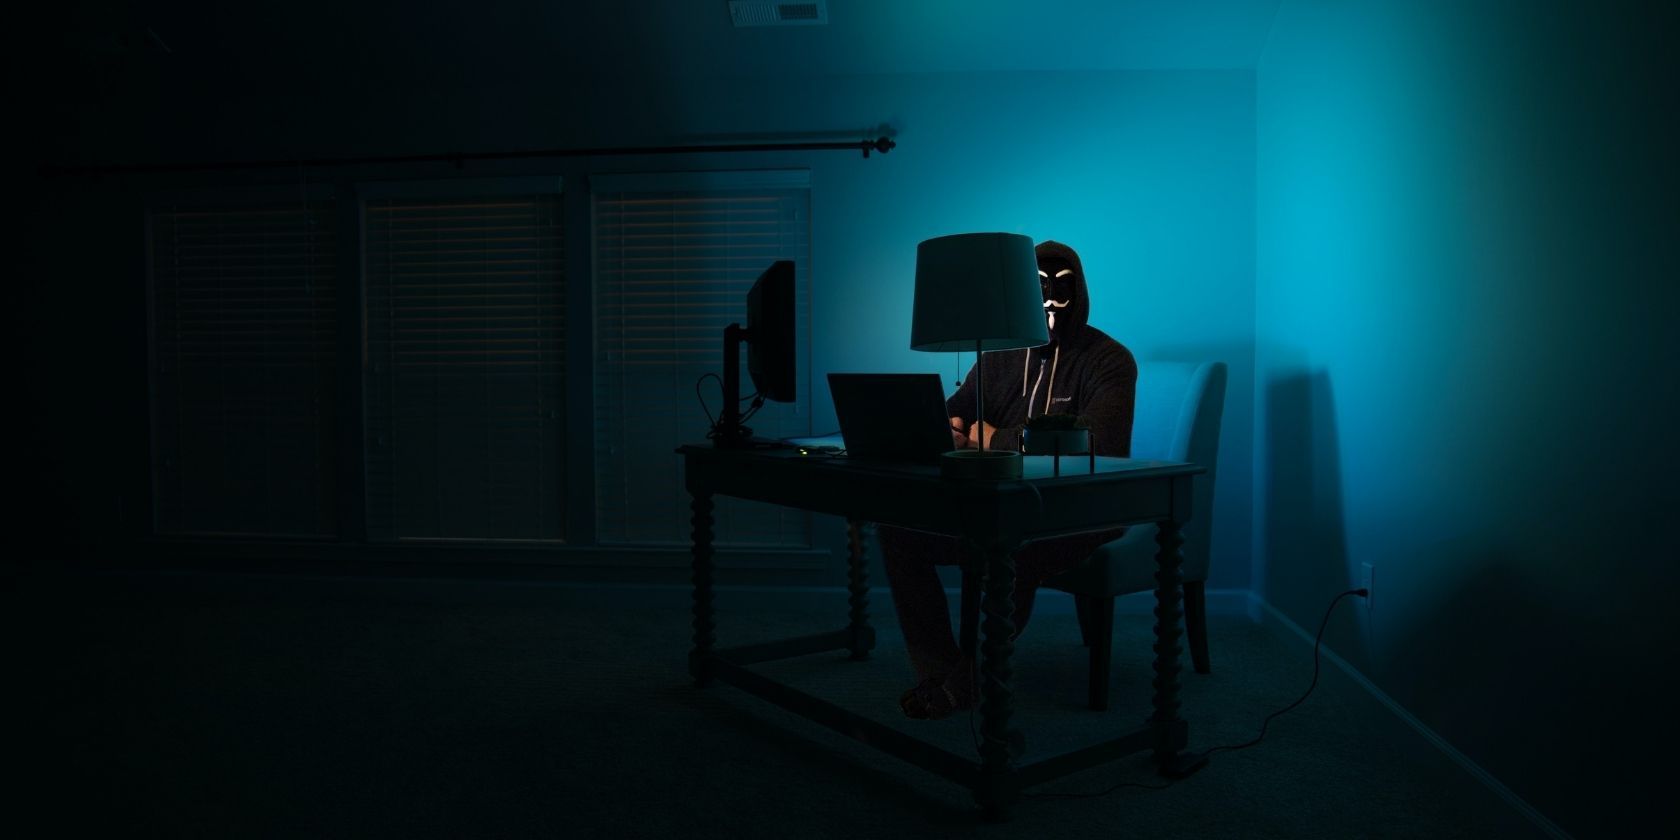 Masked man in all black sitting at computer in a dark, blue screen-lit room